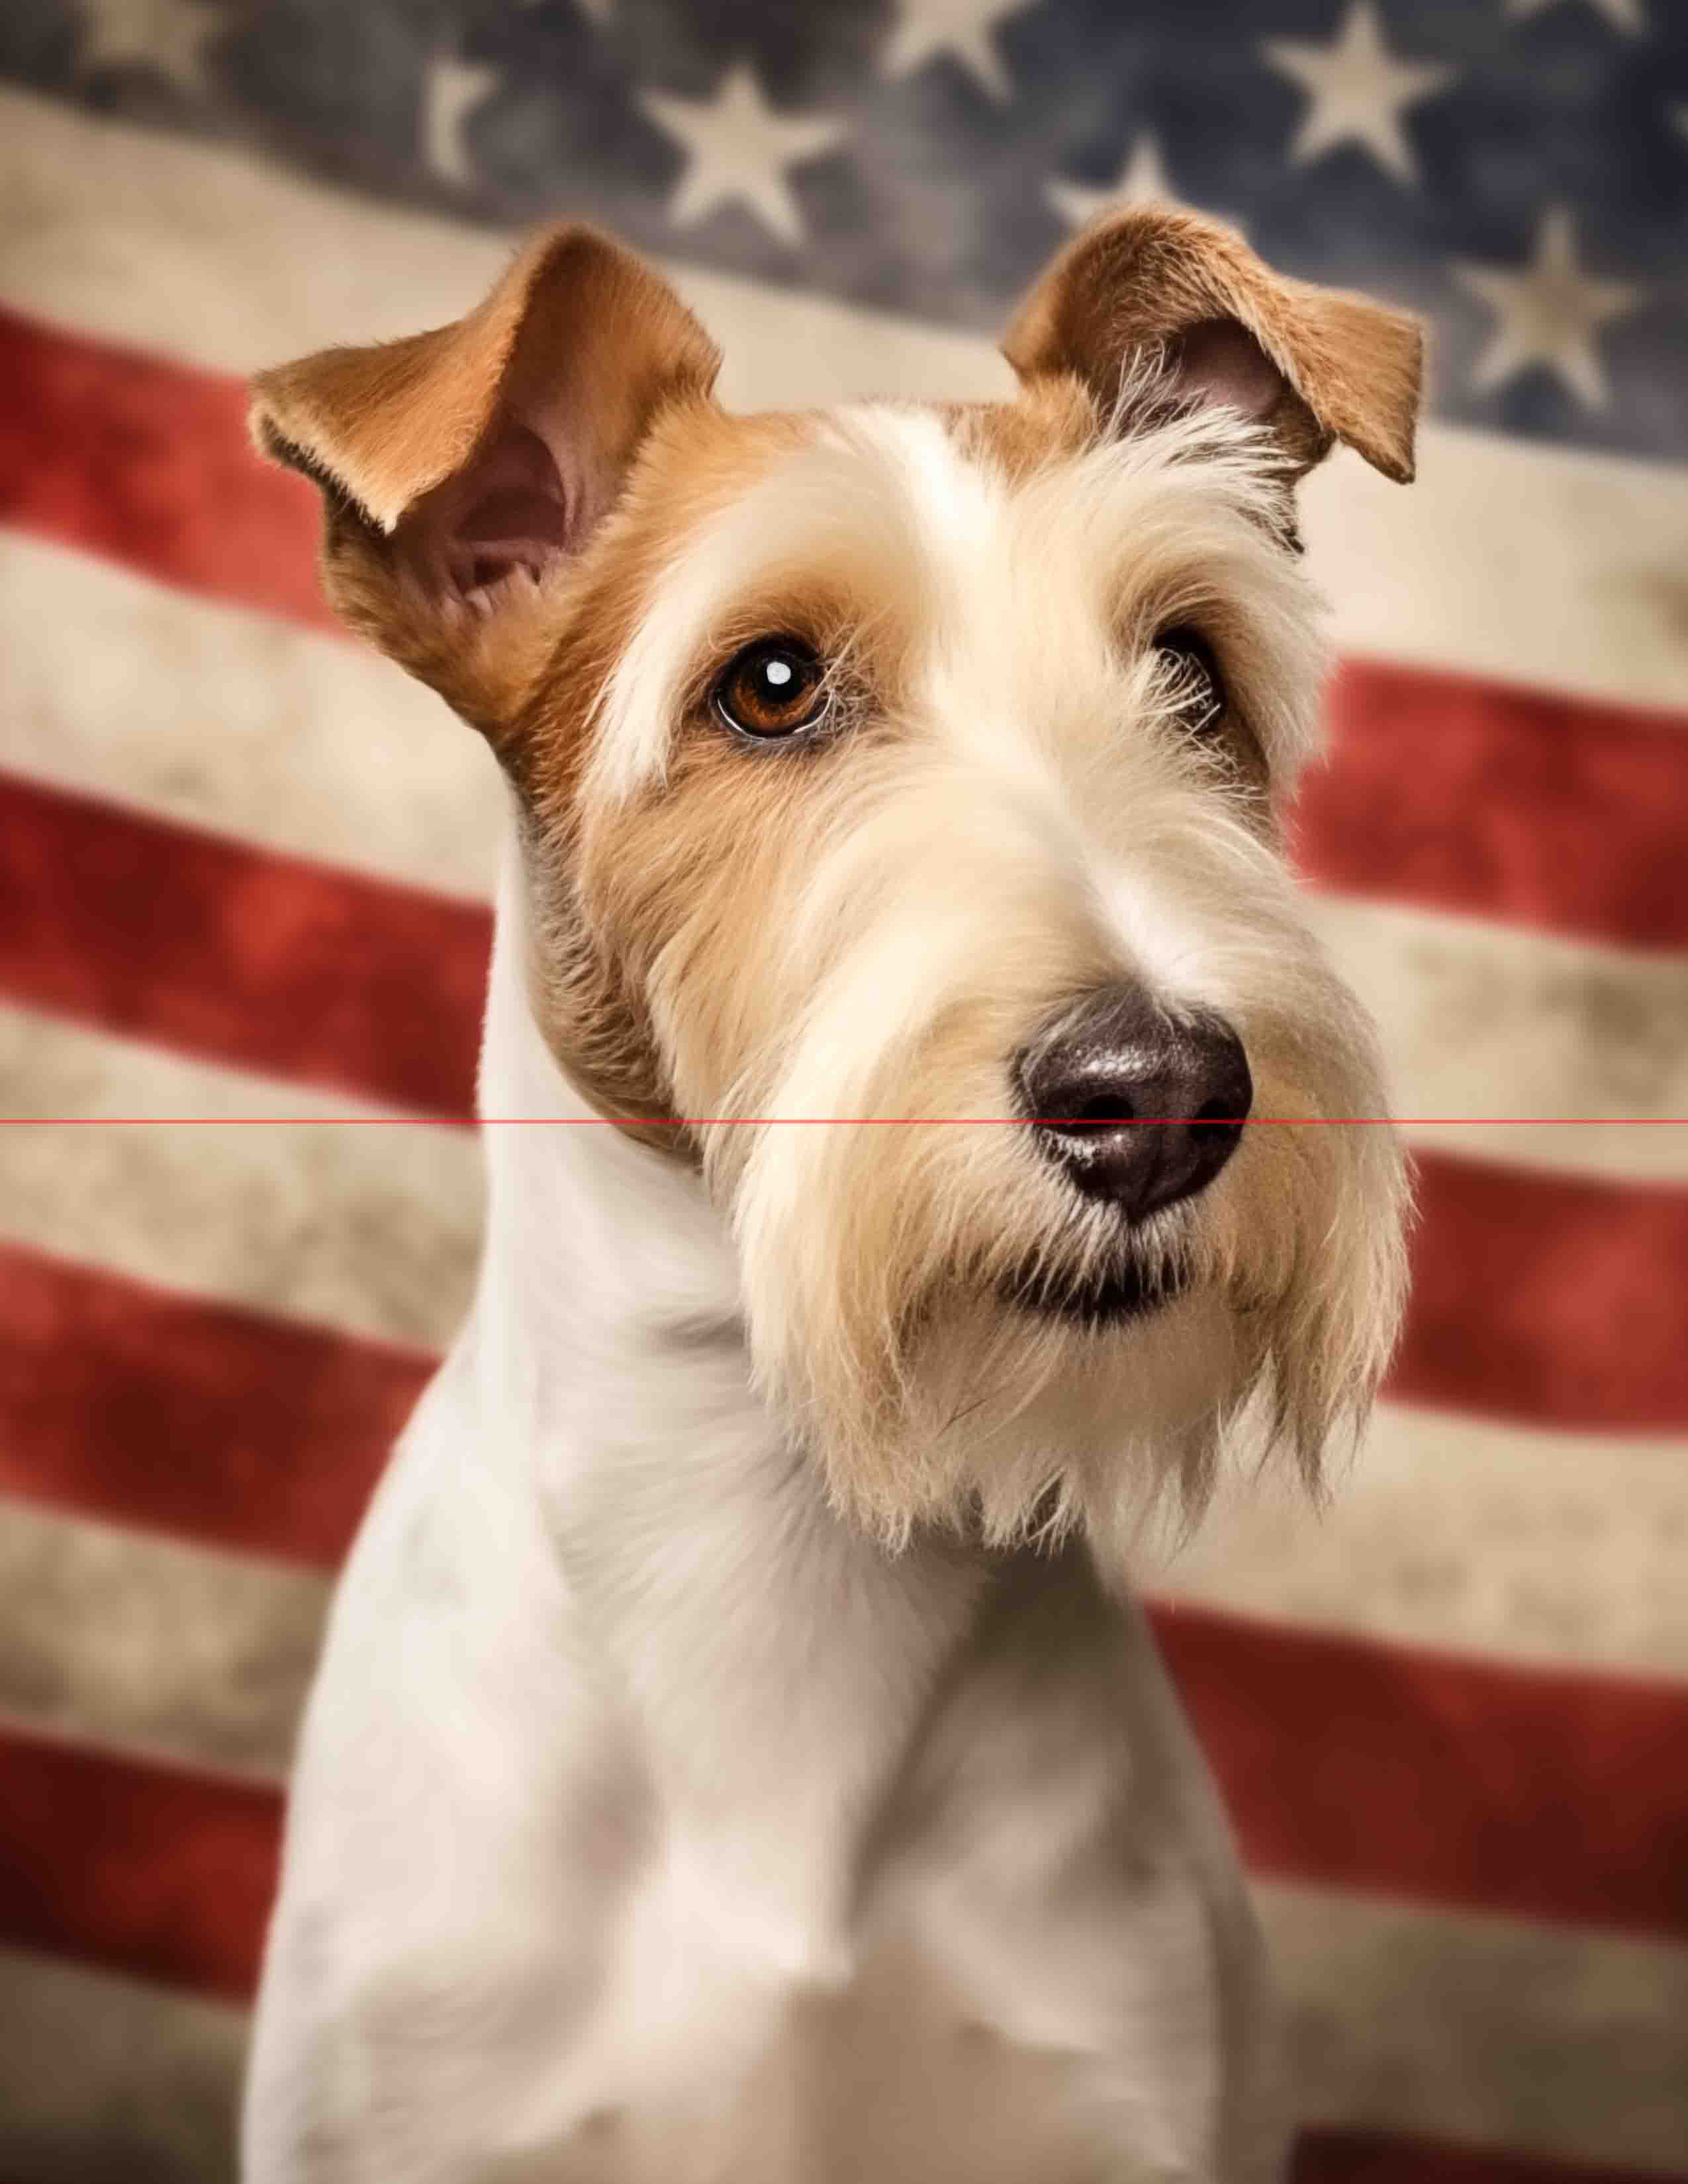 A portrait of a wire-haired fox terrier with alert expression, predominantly white with brown patches on its face, posed against an american flag with stars and stripes in the background.